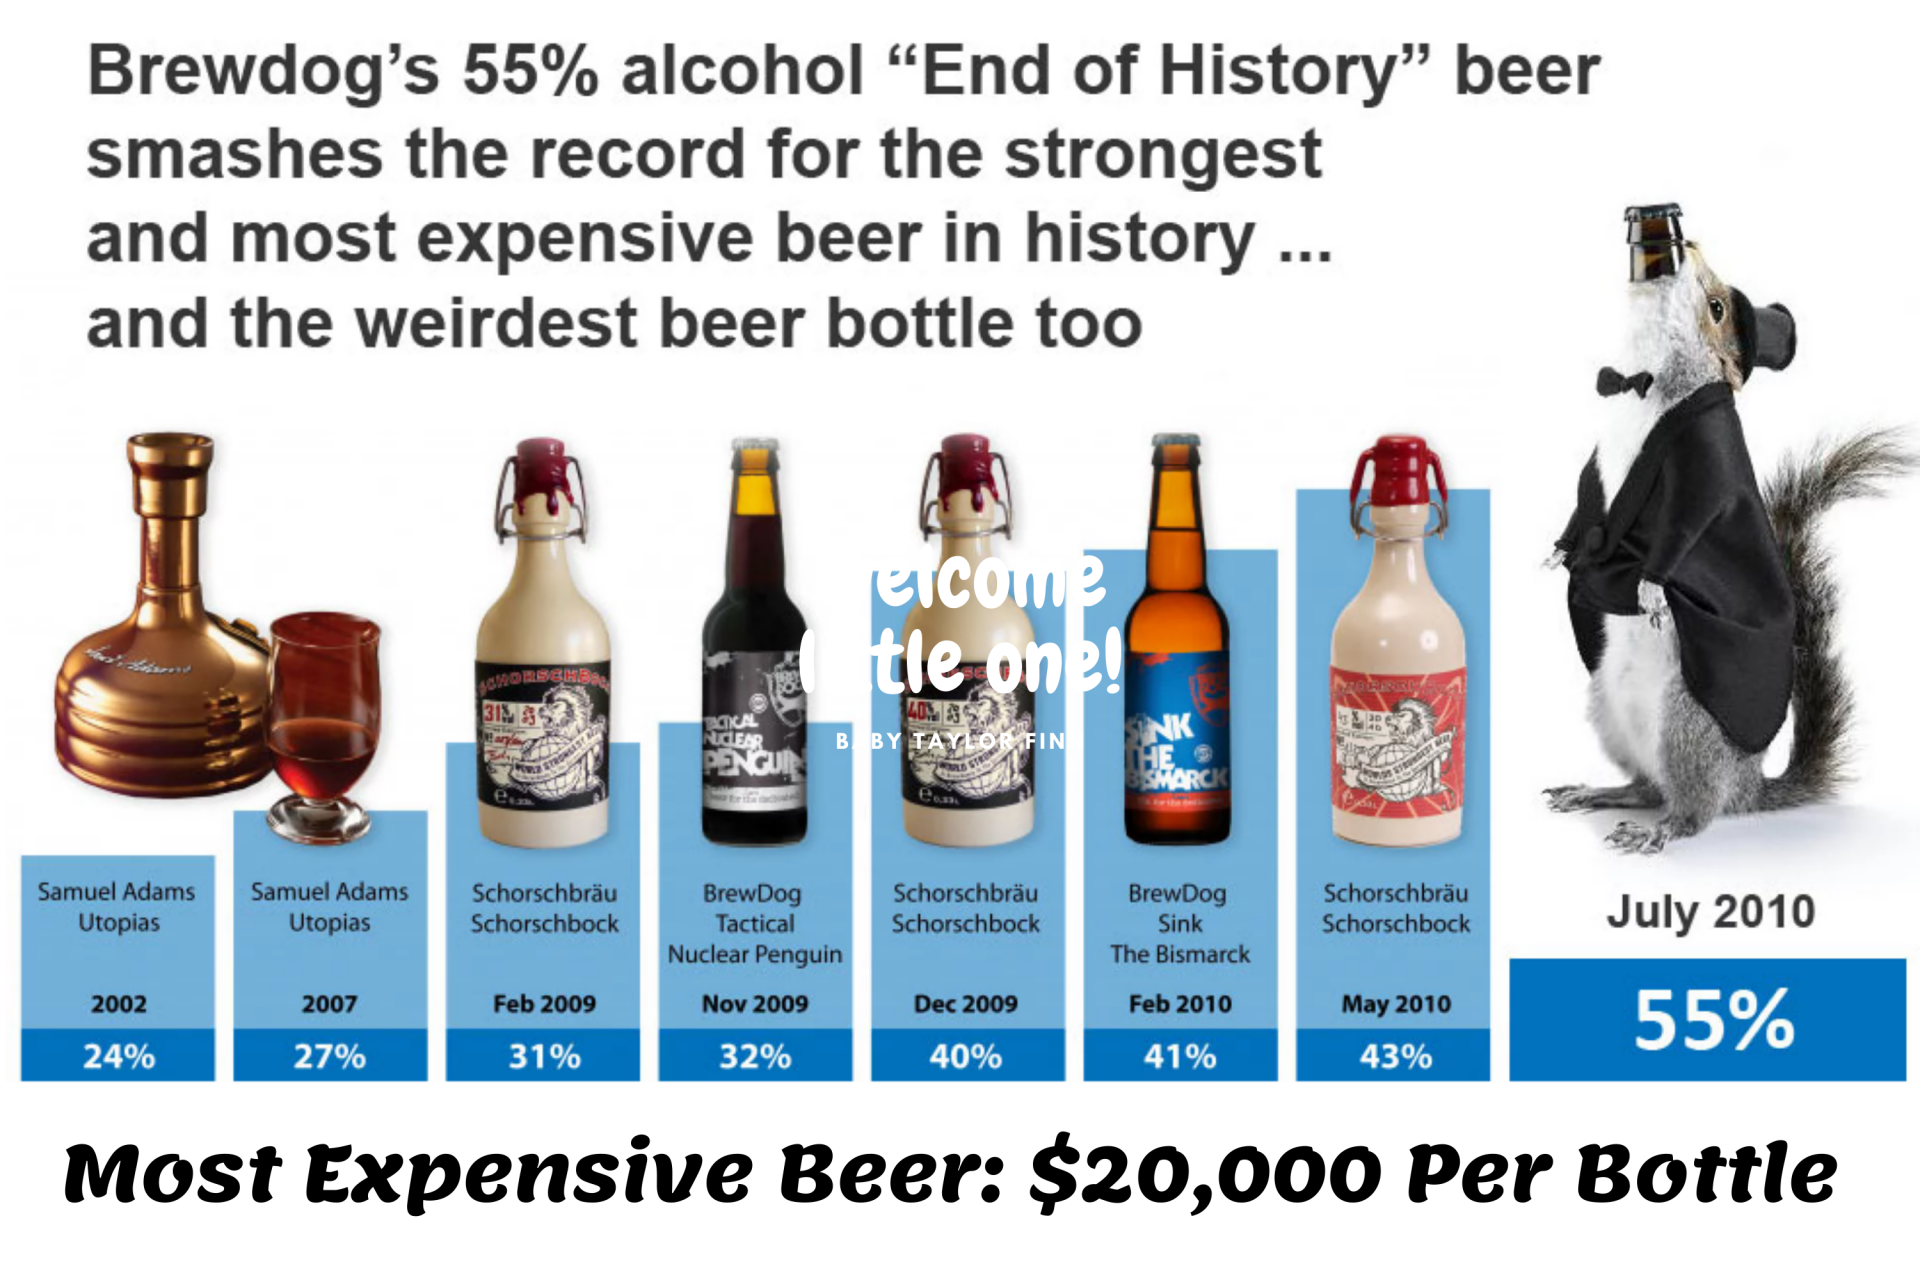 What Is The Most Expensive Beer?